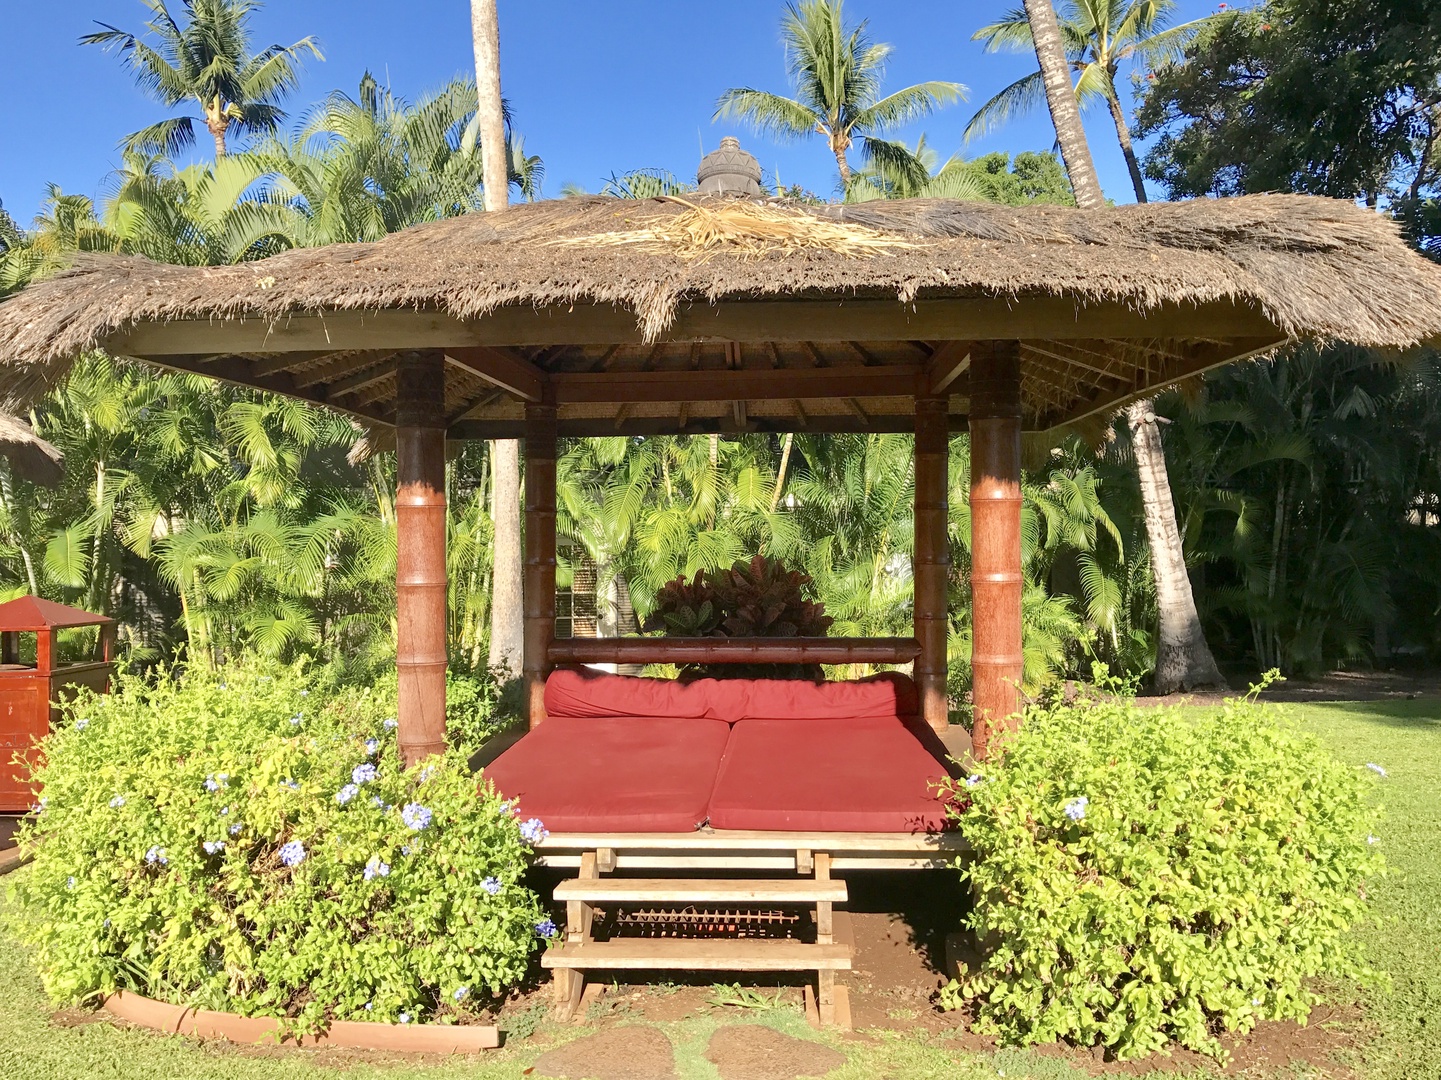 Lahaina Vacation Rentals, Aina Nalu D-207 - Enjoy a good book or a quick nap in one of the poolside cabanas.